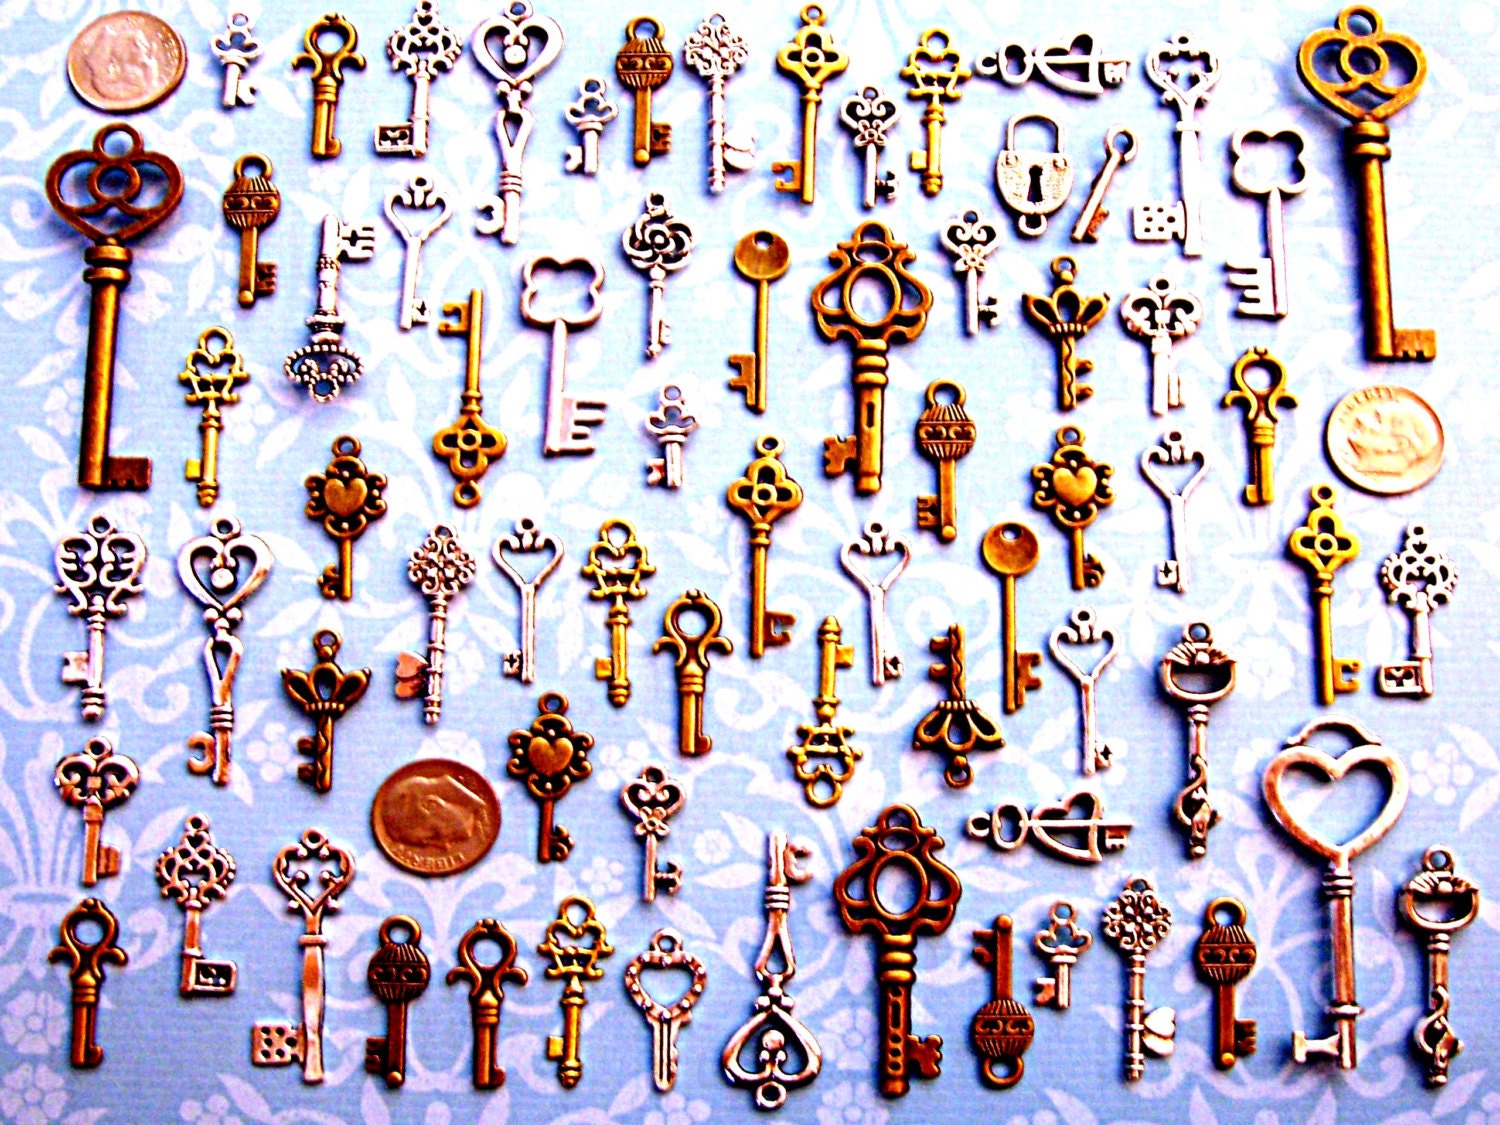 132 Bulk Lot Skeleton Keys Vintage Antique Look Replica Charm Jewelry Steampunk Wedding Bead Supplies Pendant  Collection Reproduction Craft